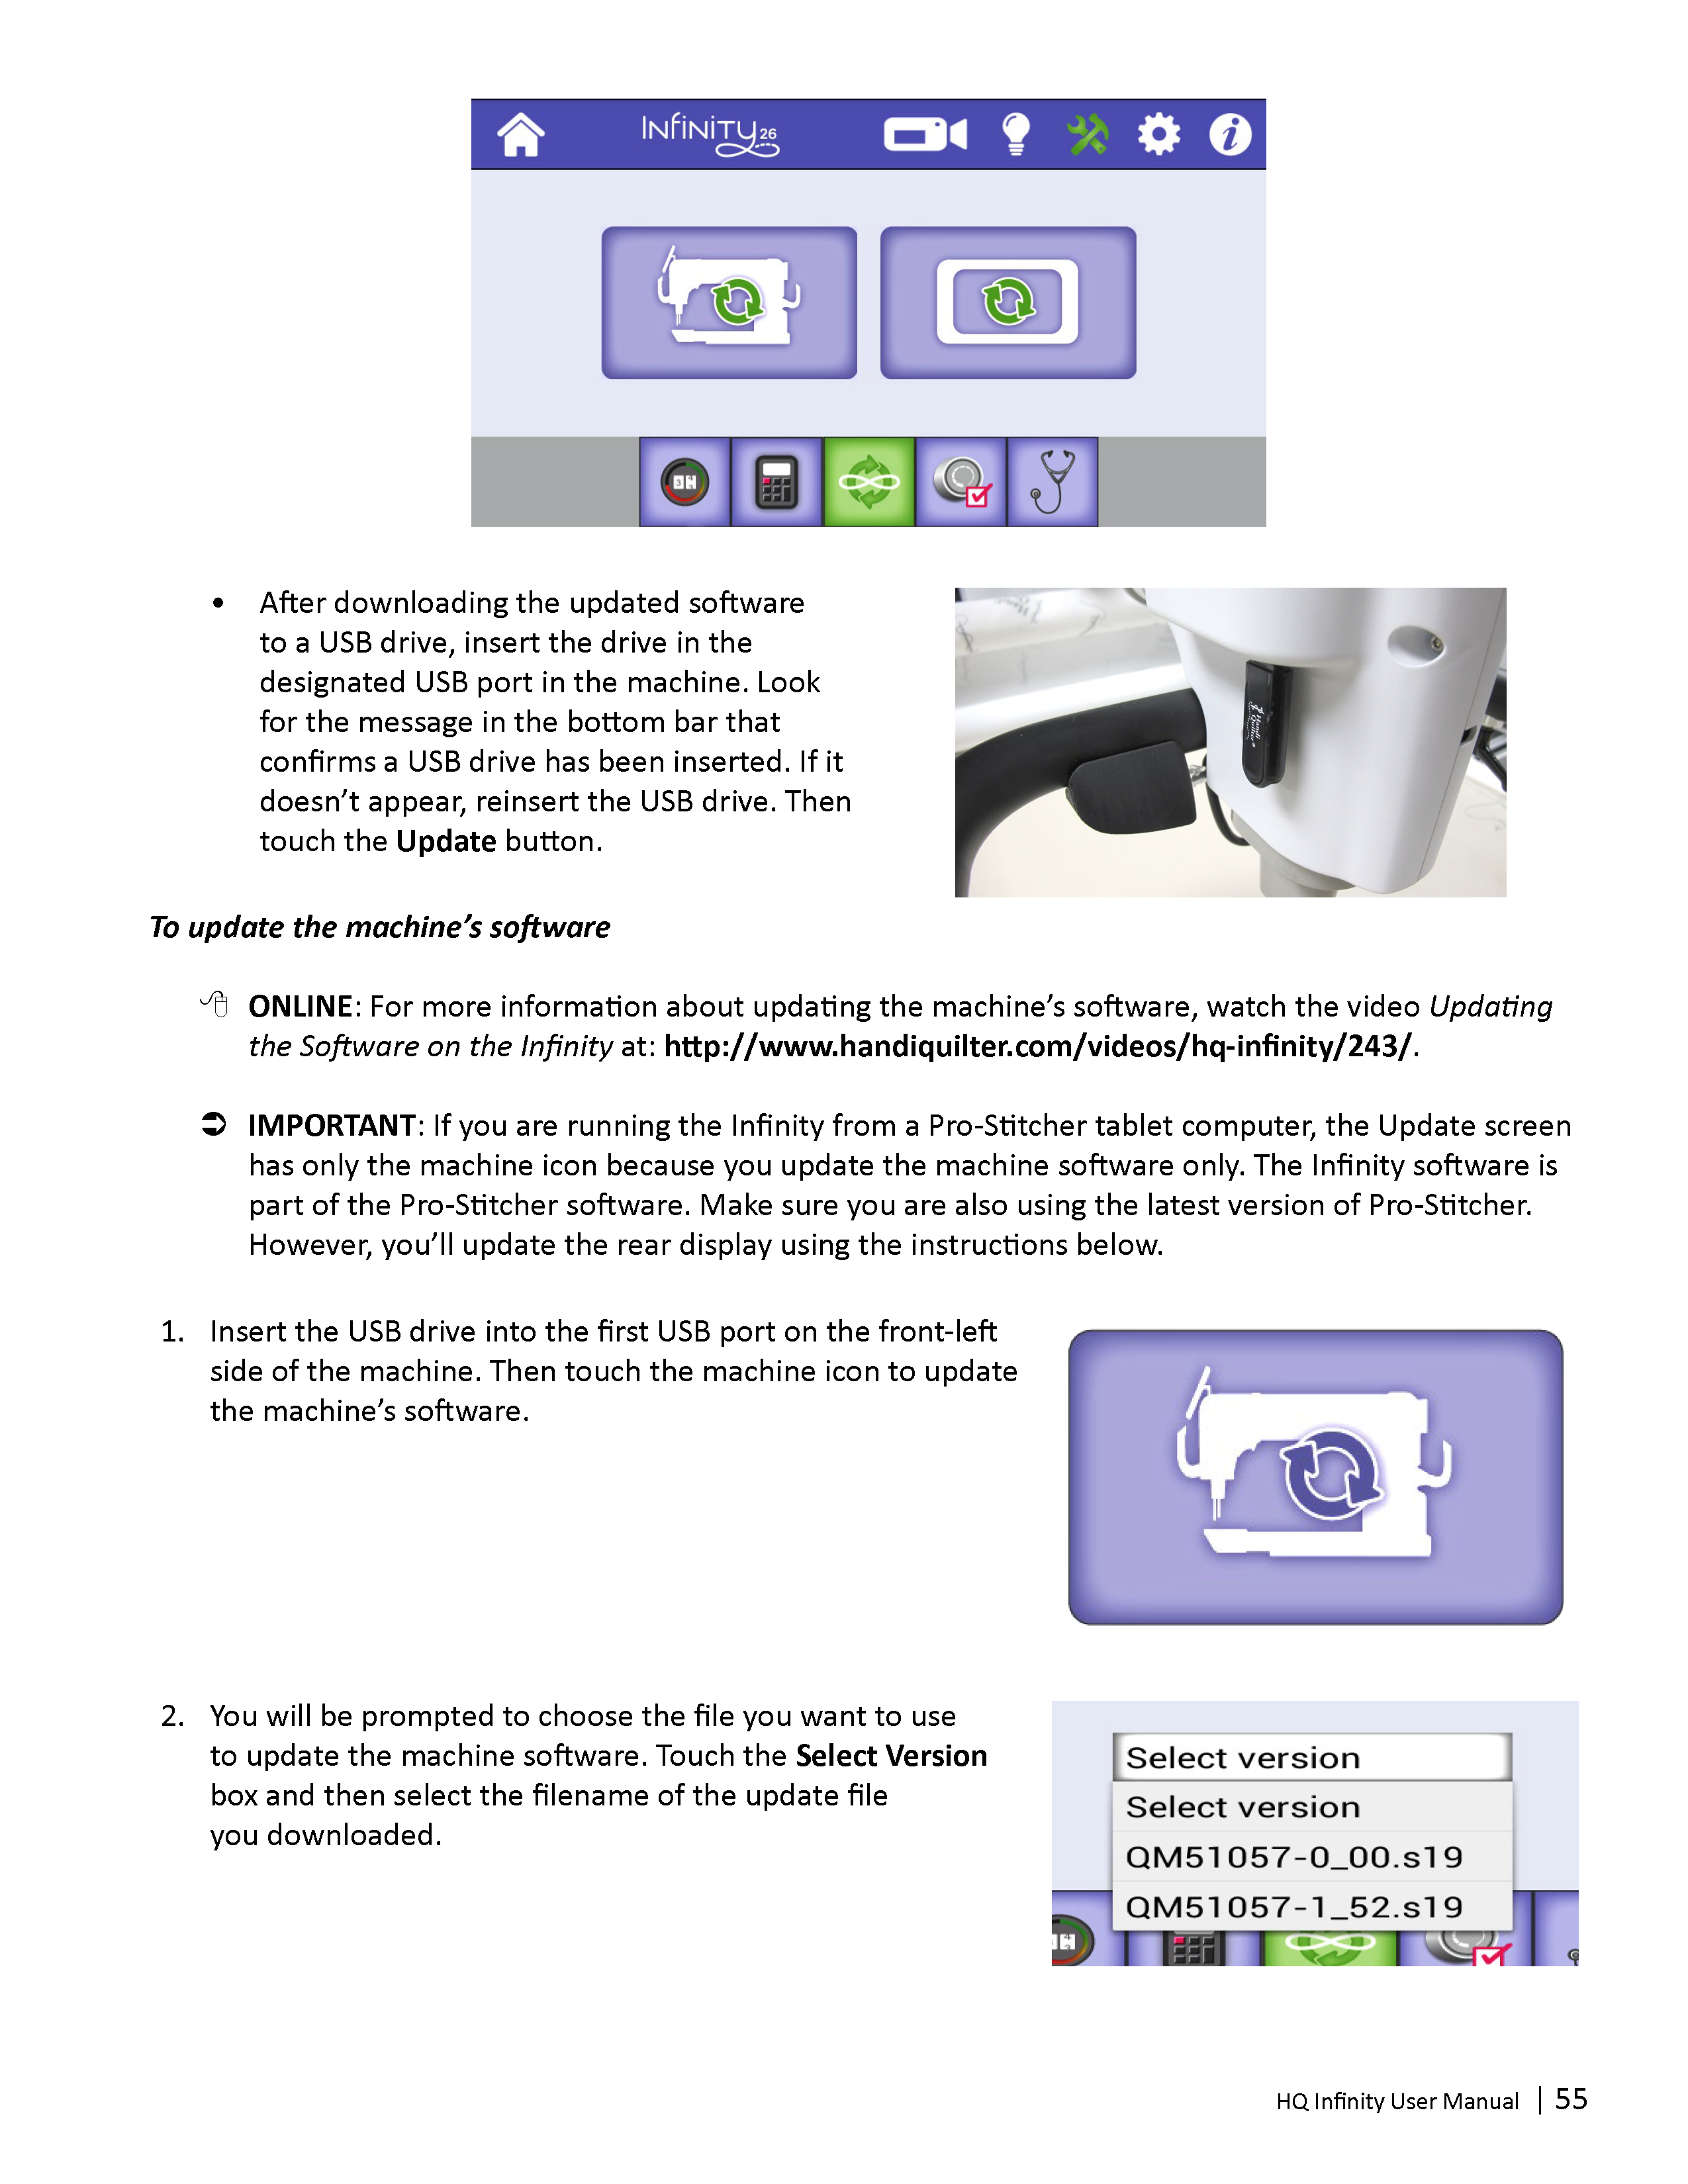 QM33001-HQ-Infinity-User-manual-version-1.4-ALL-Web-1_Page_56.png